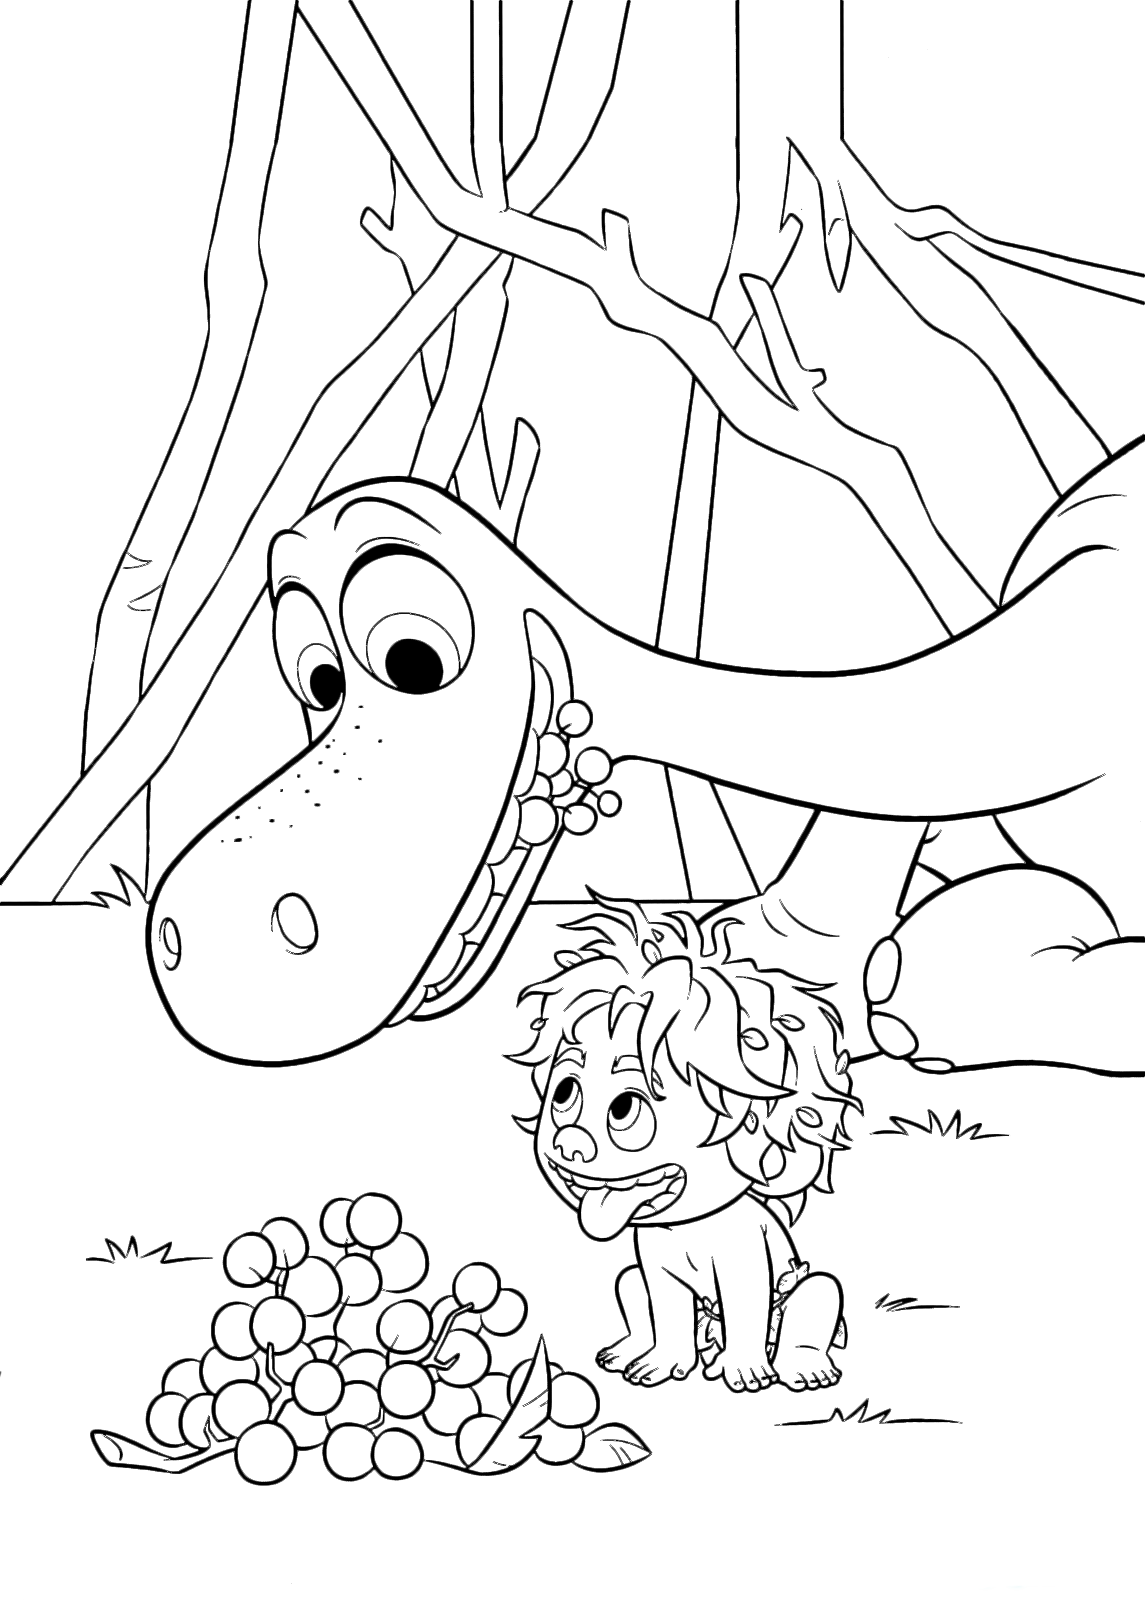 The Good Dinosaur Coloring Pages - Best Coloring Pages For ...